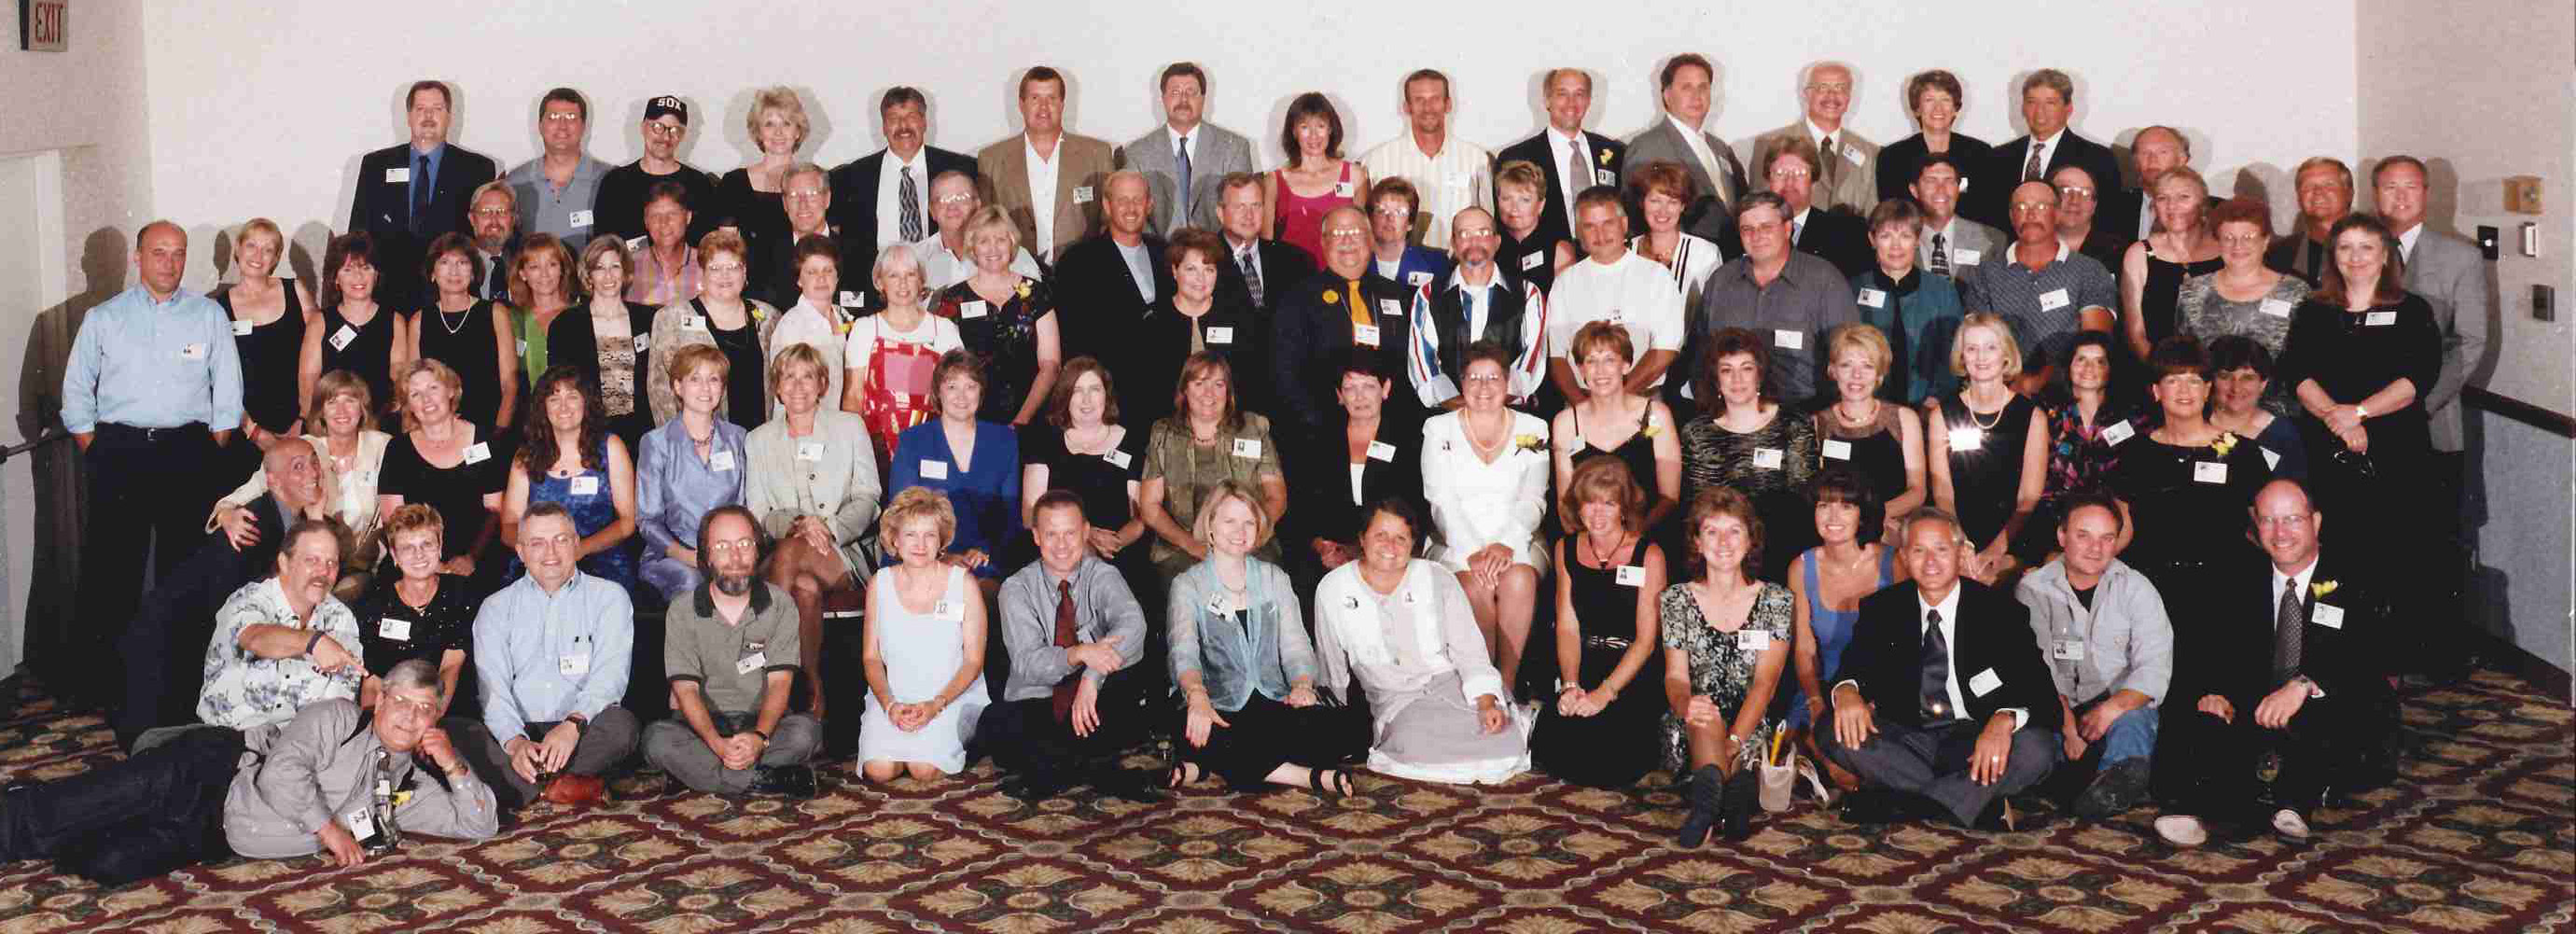 FVHS Class of 1970
30 Year Reunion in 2000